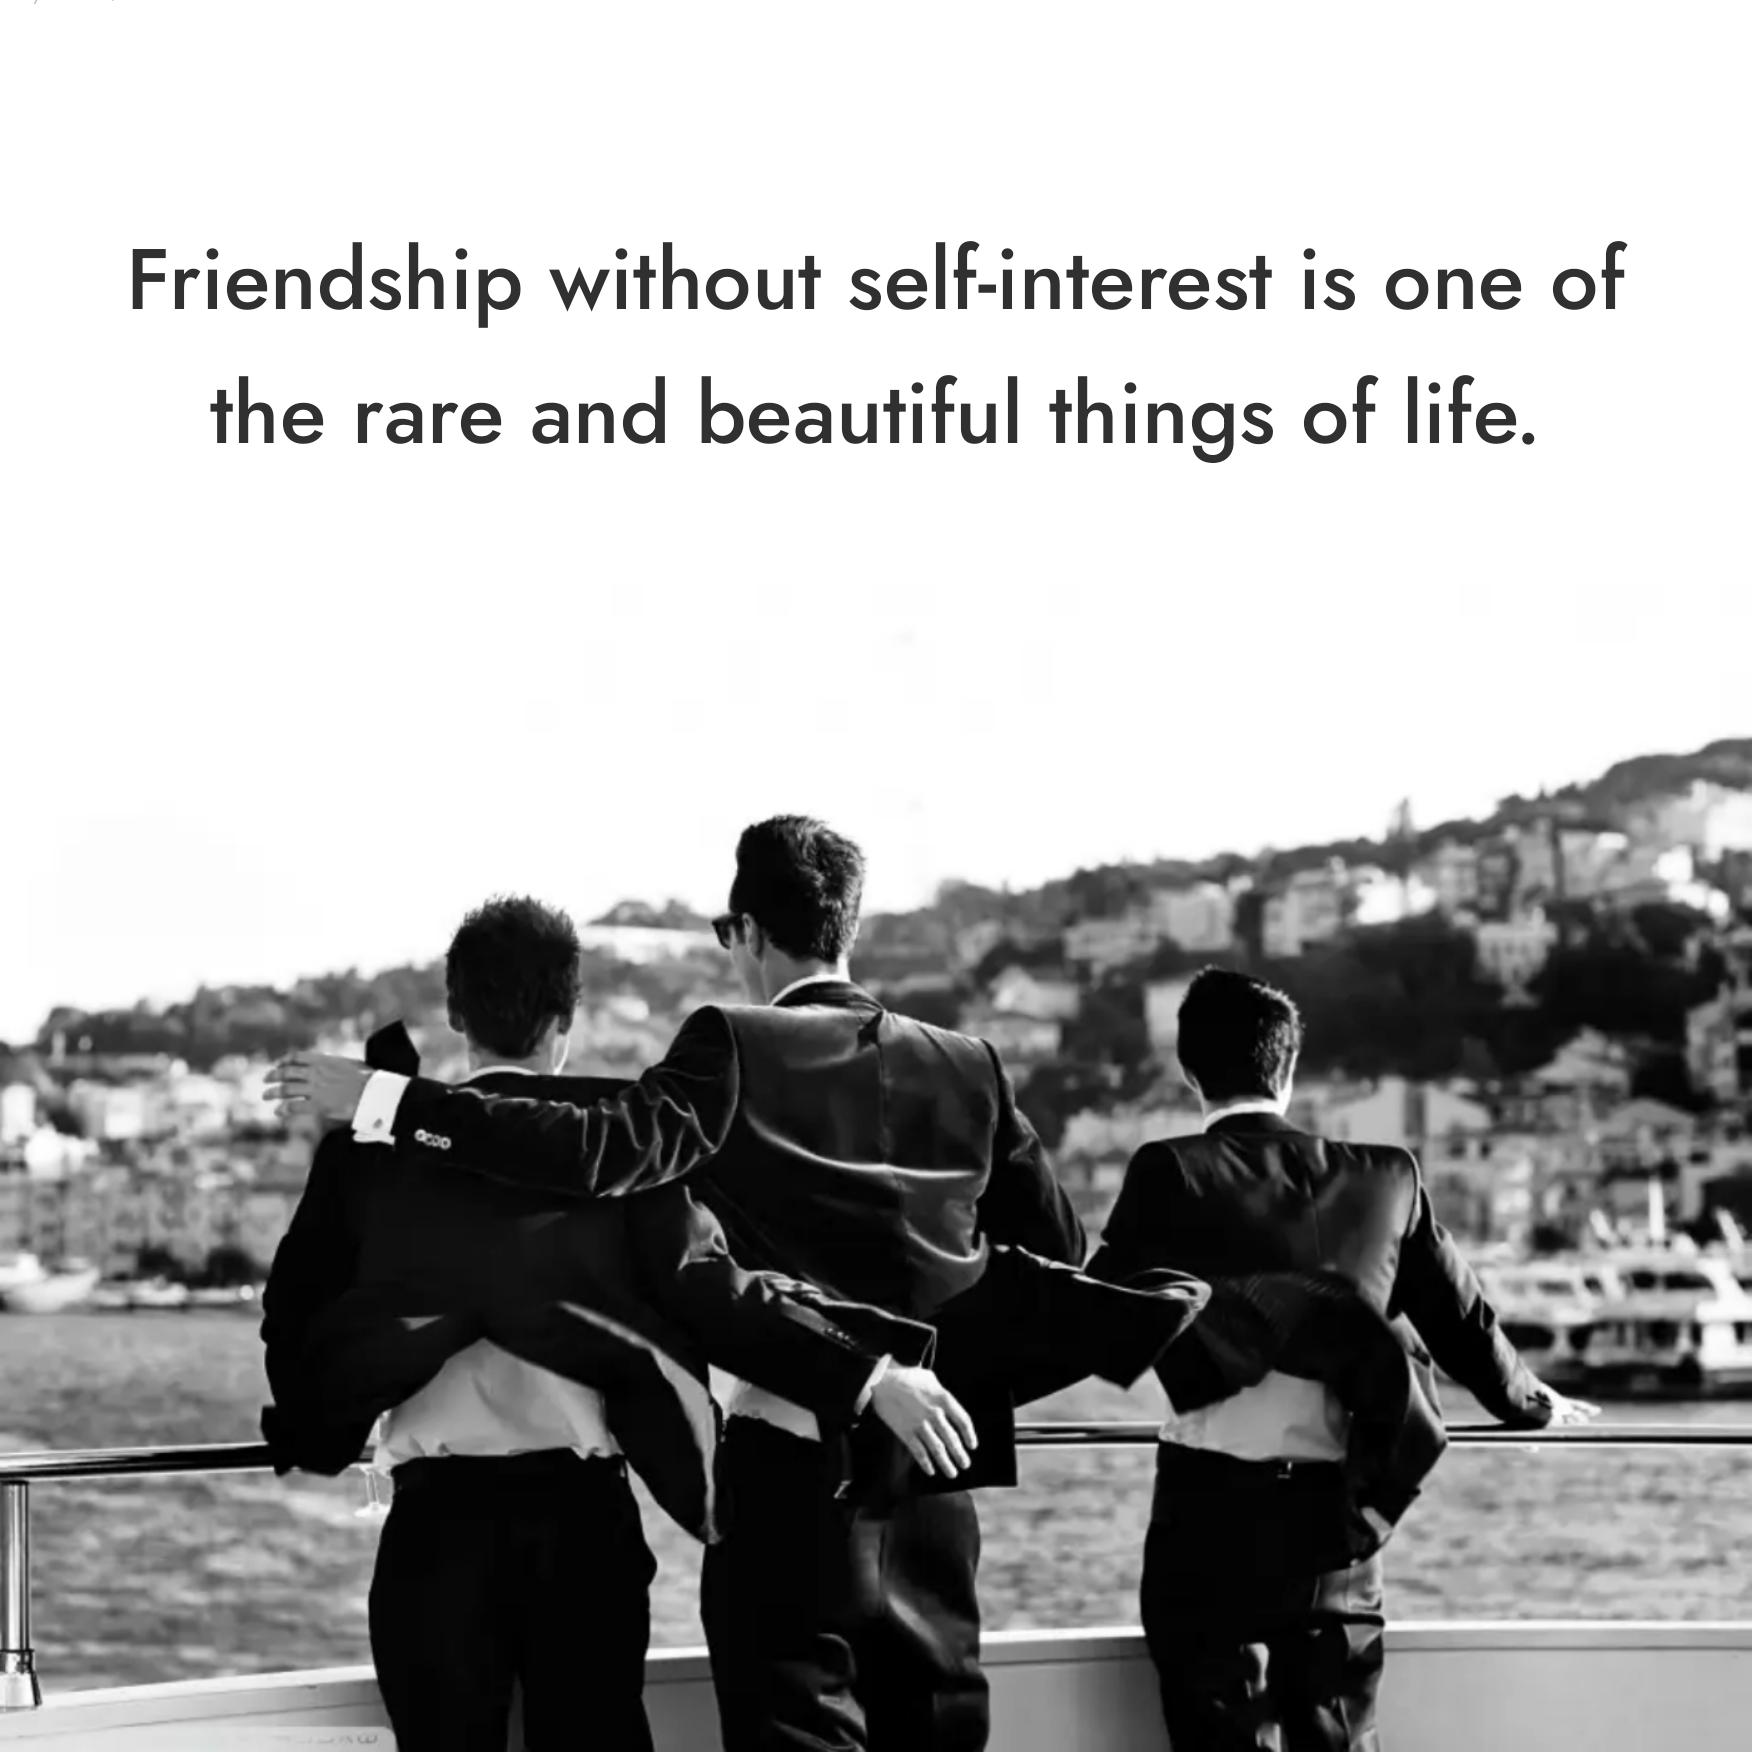 Friendship without self-interest is one of the rare and beautiful things of life